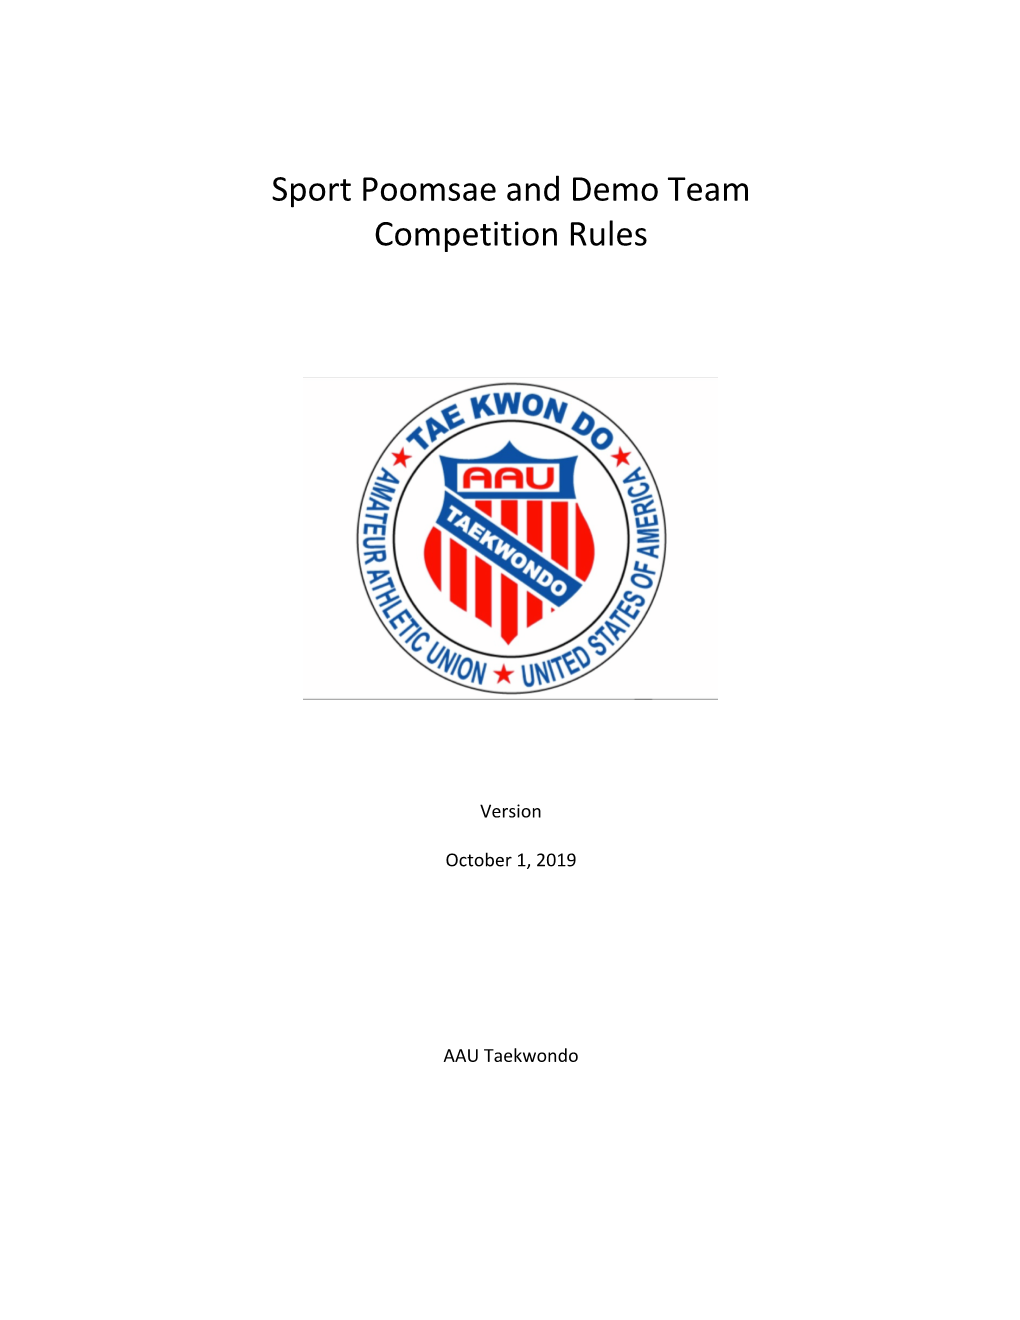 Sport Poomsae and Demo Team Competition Rules